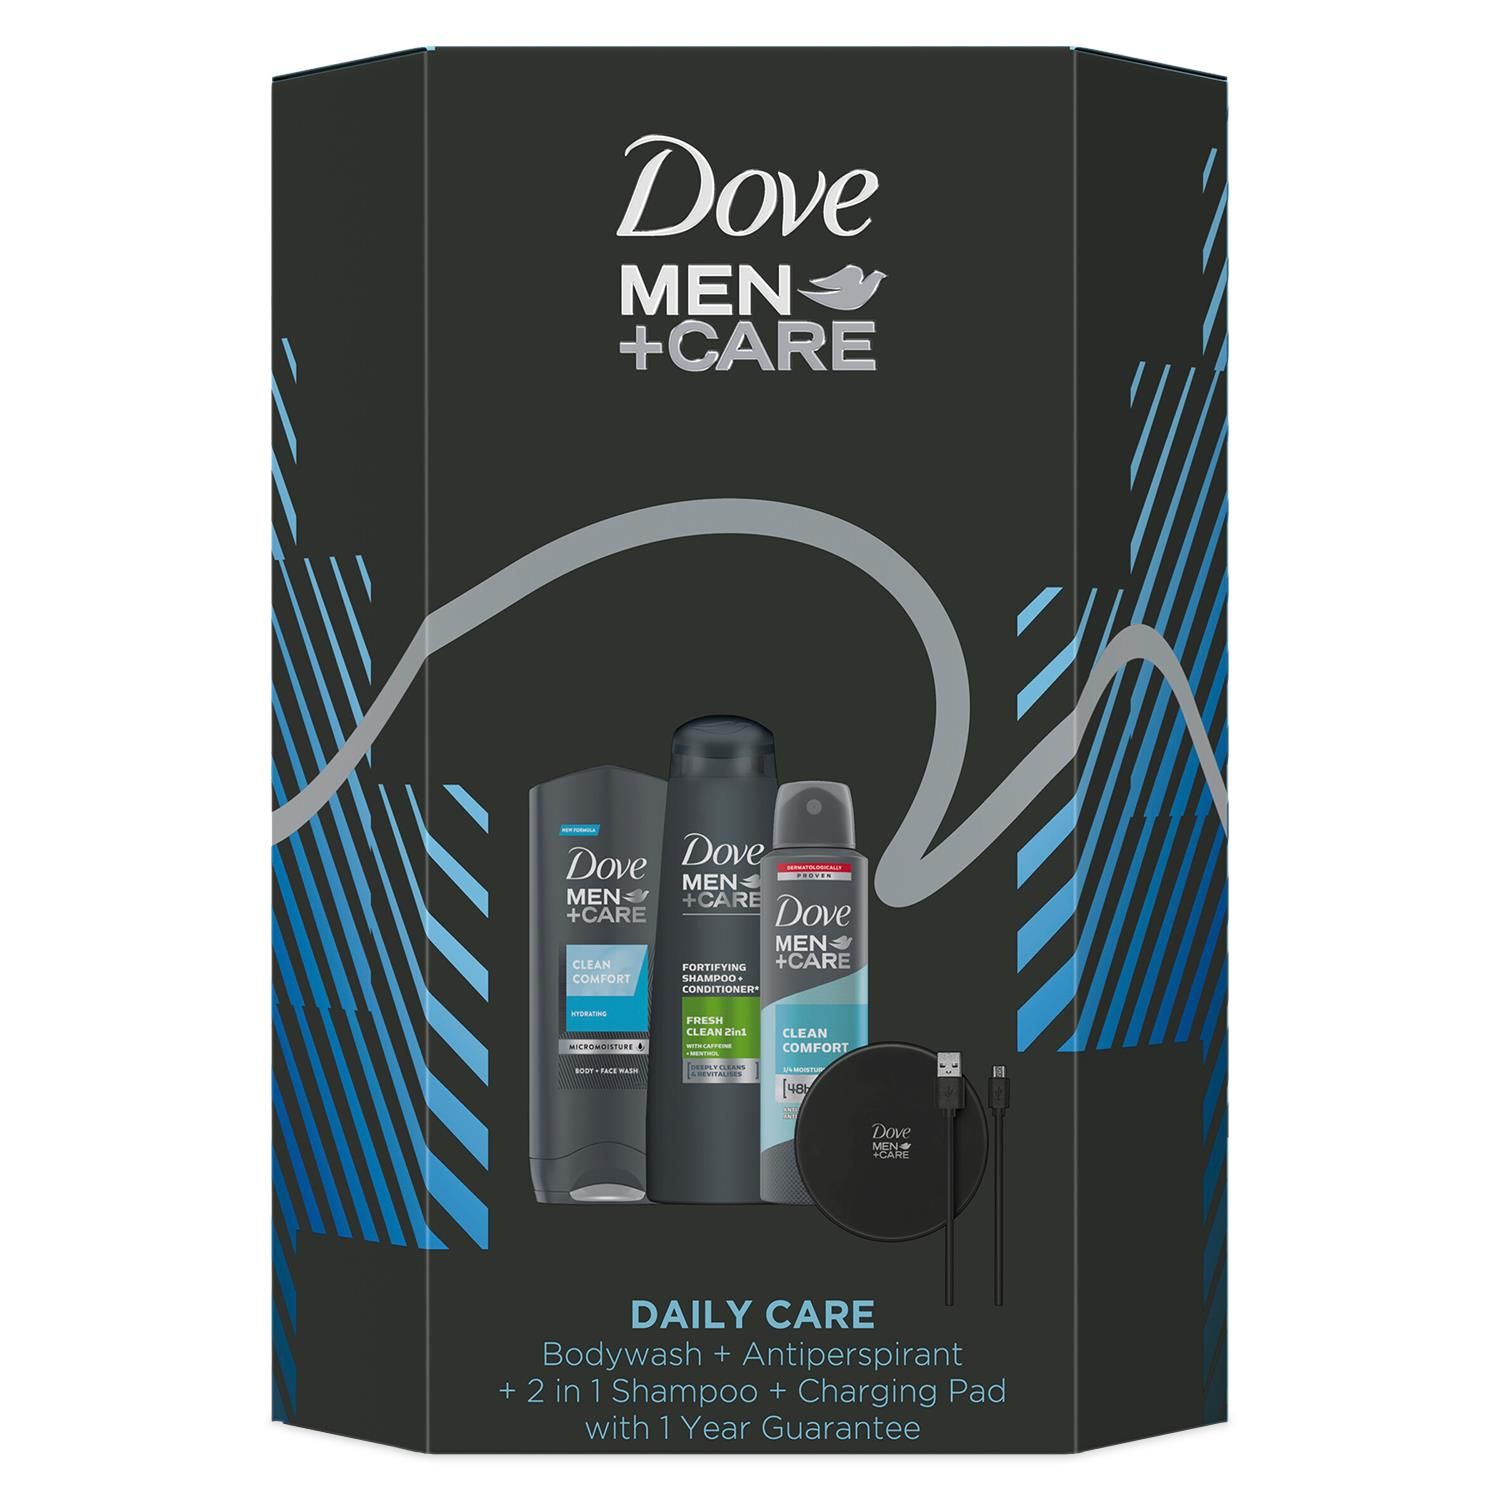 Dove Men Care Bodywash Shampoo & Deo 3pcs Gift Set For Men with Charging Pad 4pk

Body + Face Wash 250ml: Dove Men+Care Clean Comfort Body and Face Wash, with MicroMoisture technology, hydrates your skin to leave it healthy and protected against dryness. This highly effective formula rinses off easily to deliver a refreshing clean and total skin comfort. Dove Men+Care Clean Comfort Body Wash uses unique MicroMoisture technology, which activates lathering, helping to lock in your skin's natural moisture and leaving skin feeling hydrated.

Shampoo + Conditioner 250ml: Dove Men+Care Fresh & Clean Fortifying 2-in-1 Shampoo and Conditioner provides a deep, refreshing clean. Enriched with caffeine and menthol, this 2-in-1 shampoo for men washes away dirt and grease, with an energizing and refreshing effect. The product is specially engineered for men to provide a deep clean that leaves hair visibly stronger and more resilient.

Antiperspirant 150ml: Antiperspirant that can keep up with your busy schedule. If you want to stop sweat from dominating your day, try Dove Men+Care Clean Comfort Antiperspirant Aerosol. Engineered specifically for men, this antiperspirant deodorant delivers 48 hours of powerful odour and sweat protection to help you stay fresh all day.

Charging Pad: This gift set features a Dove Men+Care Charging Pad* compatible with wireless charging devices and provides 10W fast charging capability. The perfect gift for any occasion.

How to Use: 

Face+Body Wash: Squeeze some body wash into your hand. Work it into a lather with wet hands and massage all over your skin.
Anti-Perspirant: Shake well, hold the can 15cm from the underarm, and spray.
Shampoo+Conditioner: Massage Shampoo into wet hair and rinse. follow it with conditioner to massage and rinse.

Gift Set Includes: 
1x Dove Clean Comfort Face & Body Wash 250 ml
1x Dove Fresh Clean Fortifying 2-in-1 Shampoo & Conditioner 250 ml
1x Dove Clean Comfort Antiperspirant Deodorant 150 ml 
1x Wireless Charger